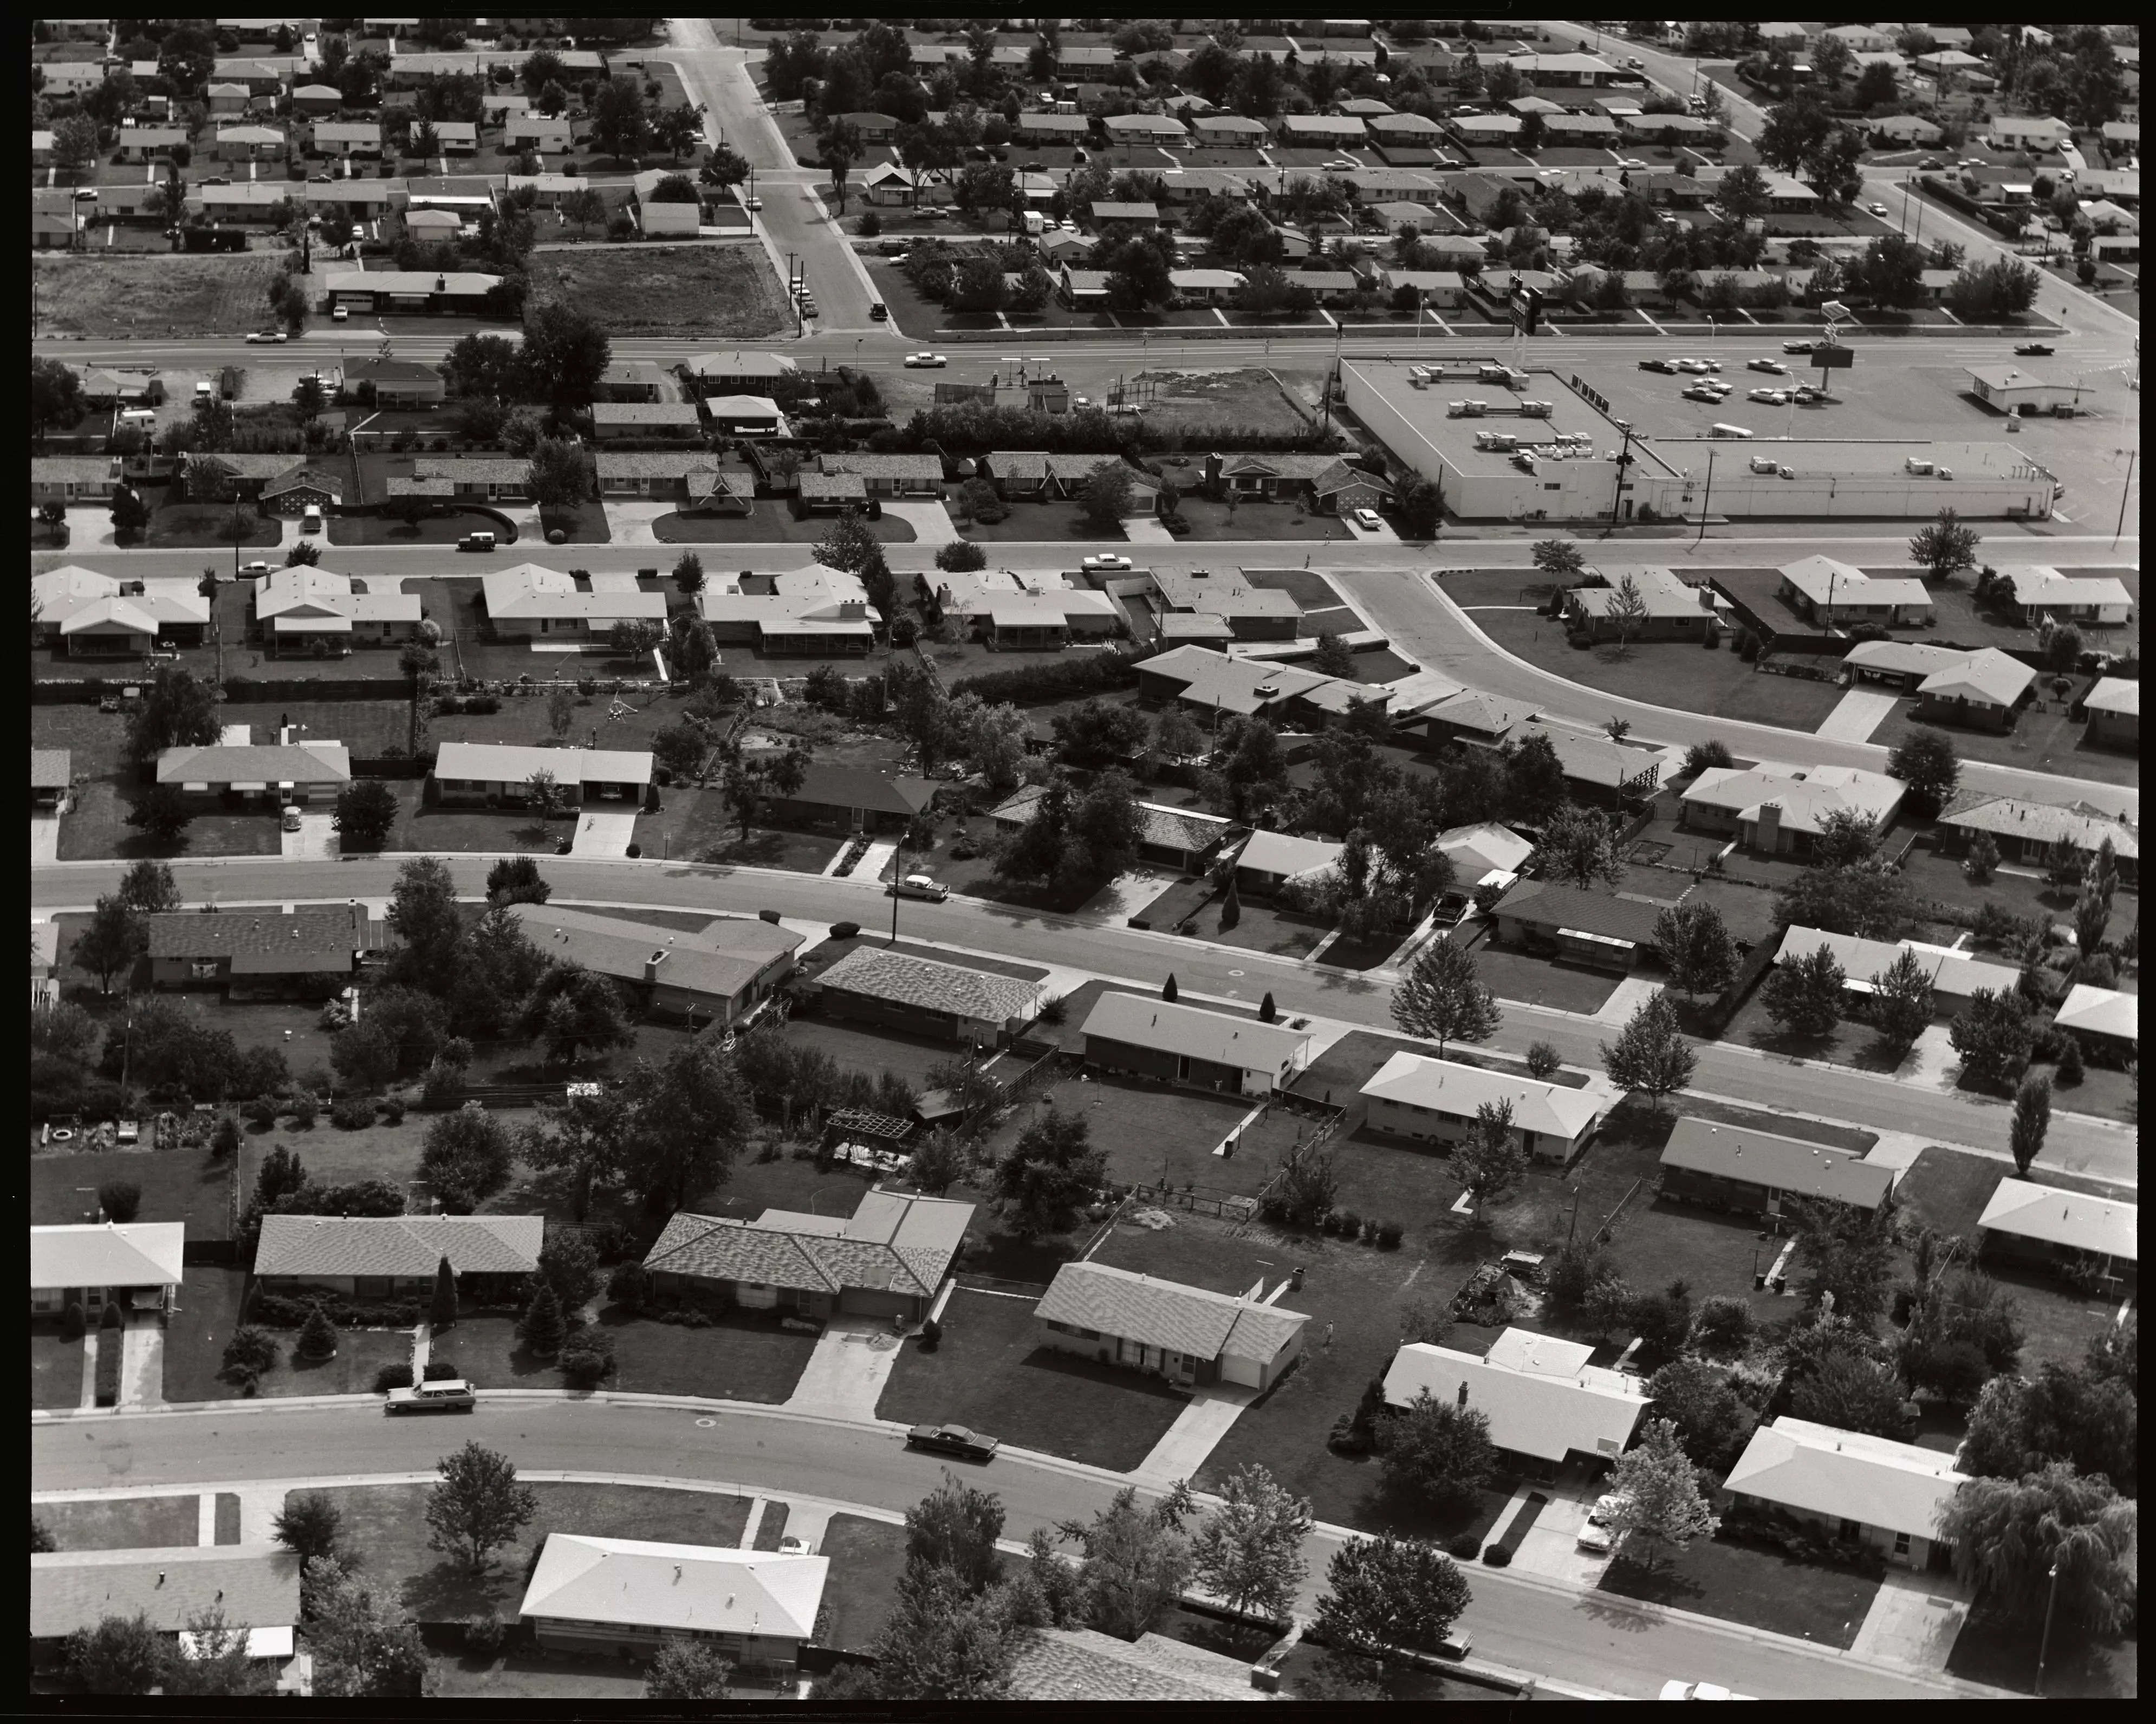 Tract homes in suburban development, homes, lawns, driveways and roads comprise a typical suburban neighborhood, circa 1967